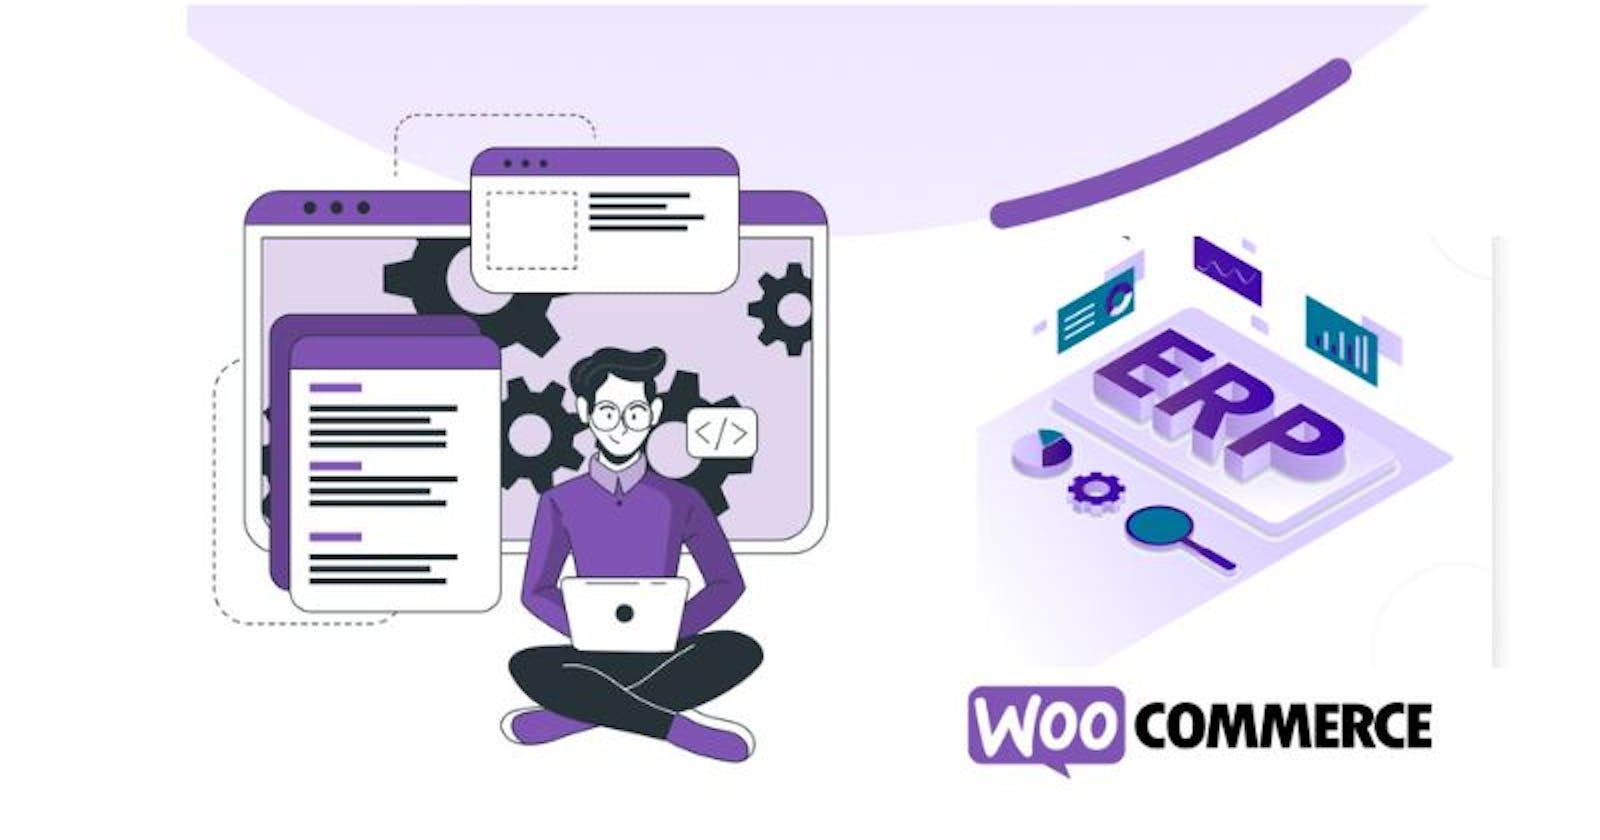 Driving Growth and Profitability: The Case for WooCommerce ERP Integration